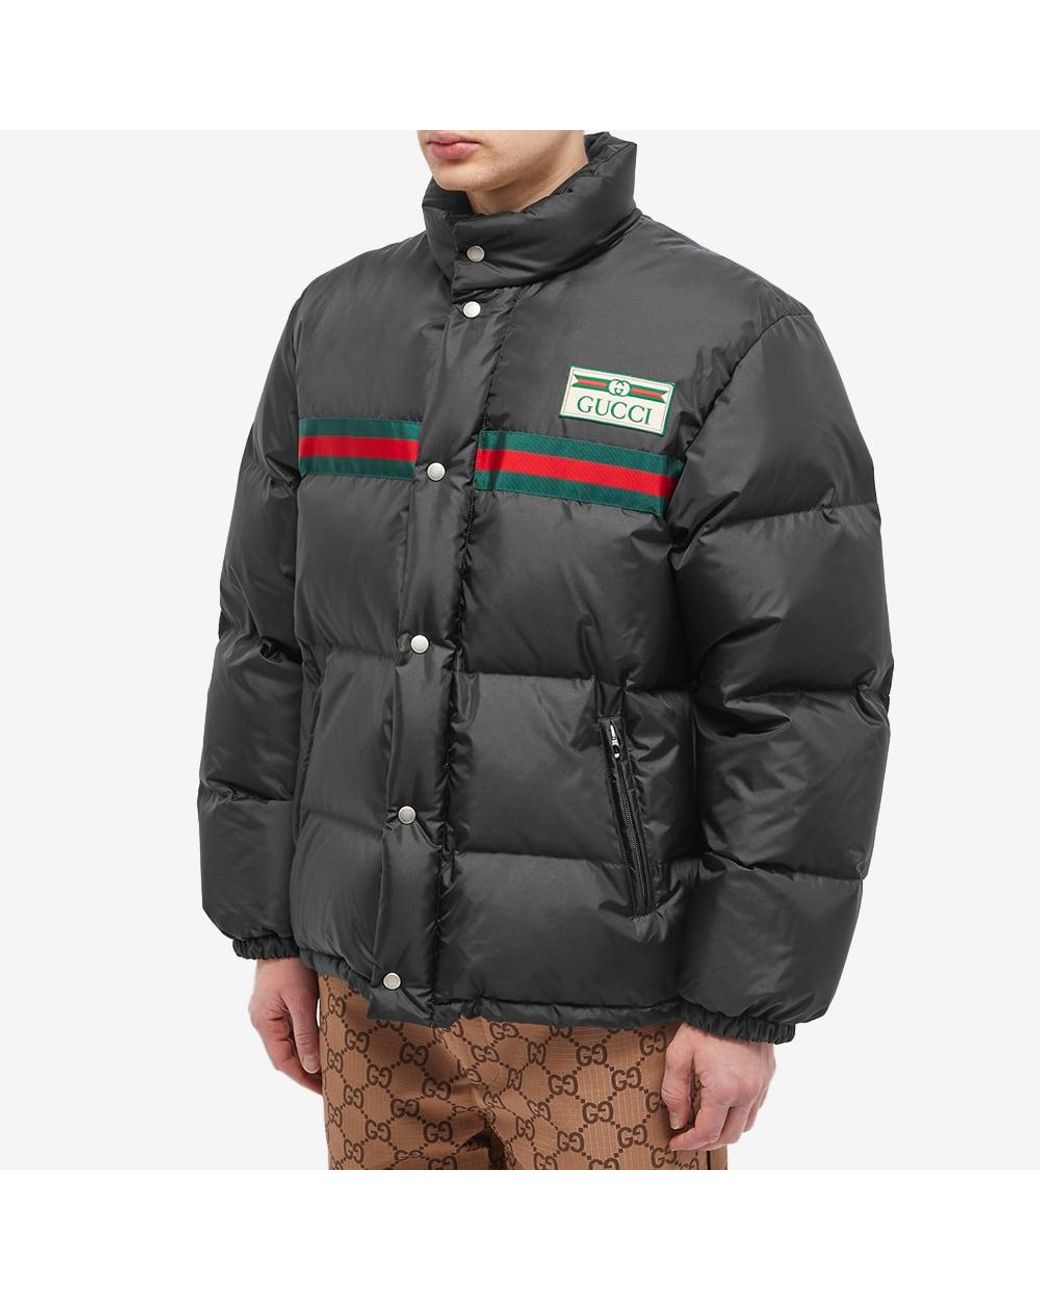 Gucci Grg Tape Down Parka Jacket in Gray for Men | Lyst